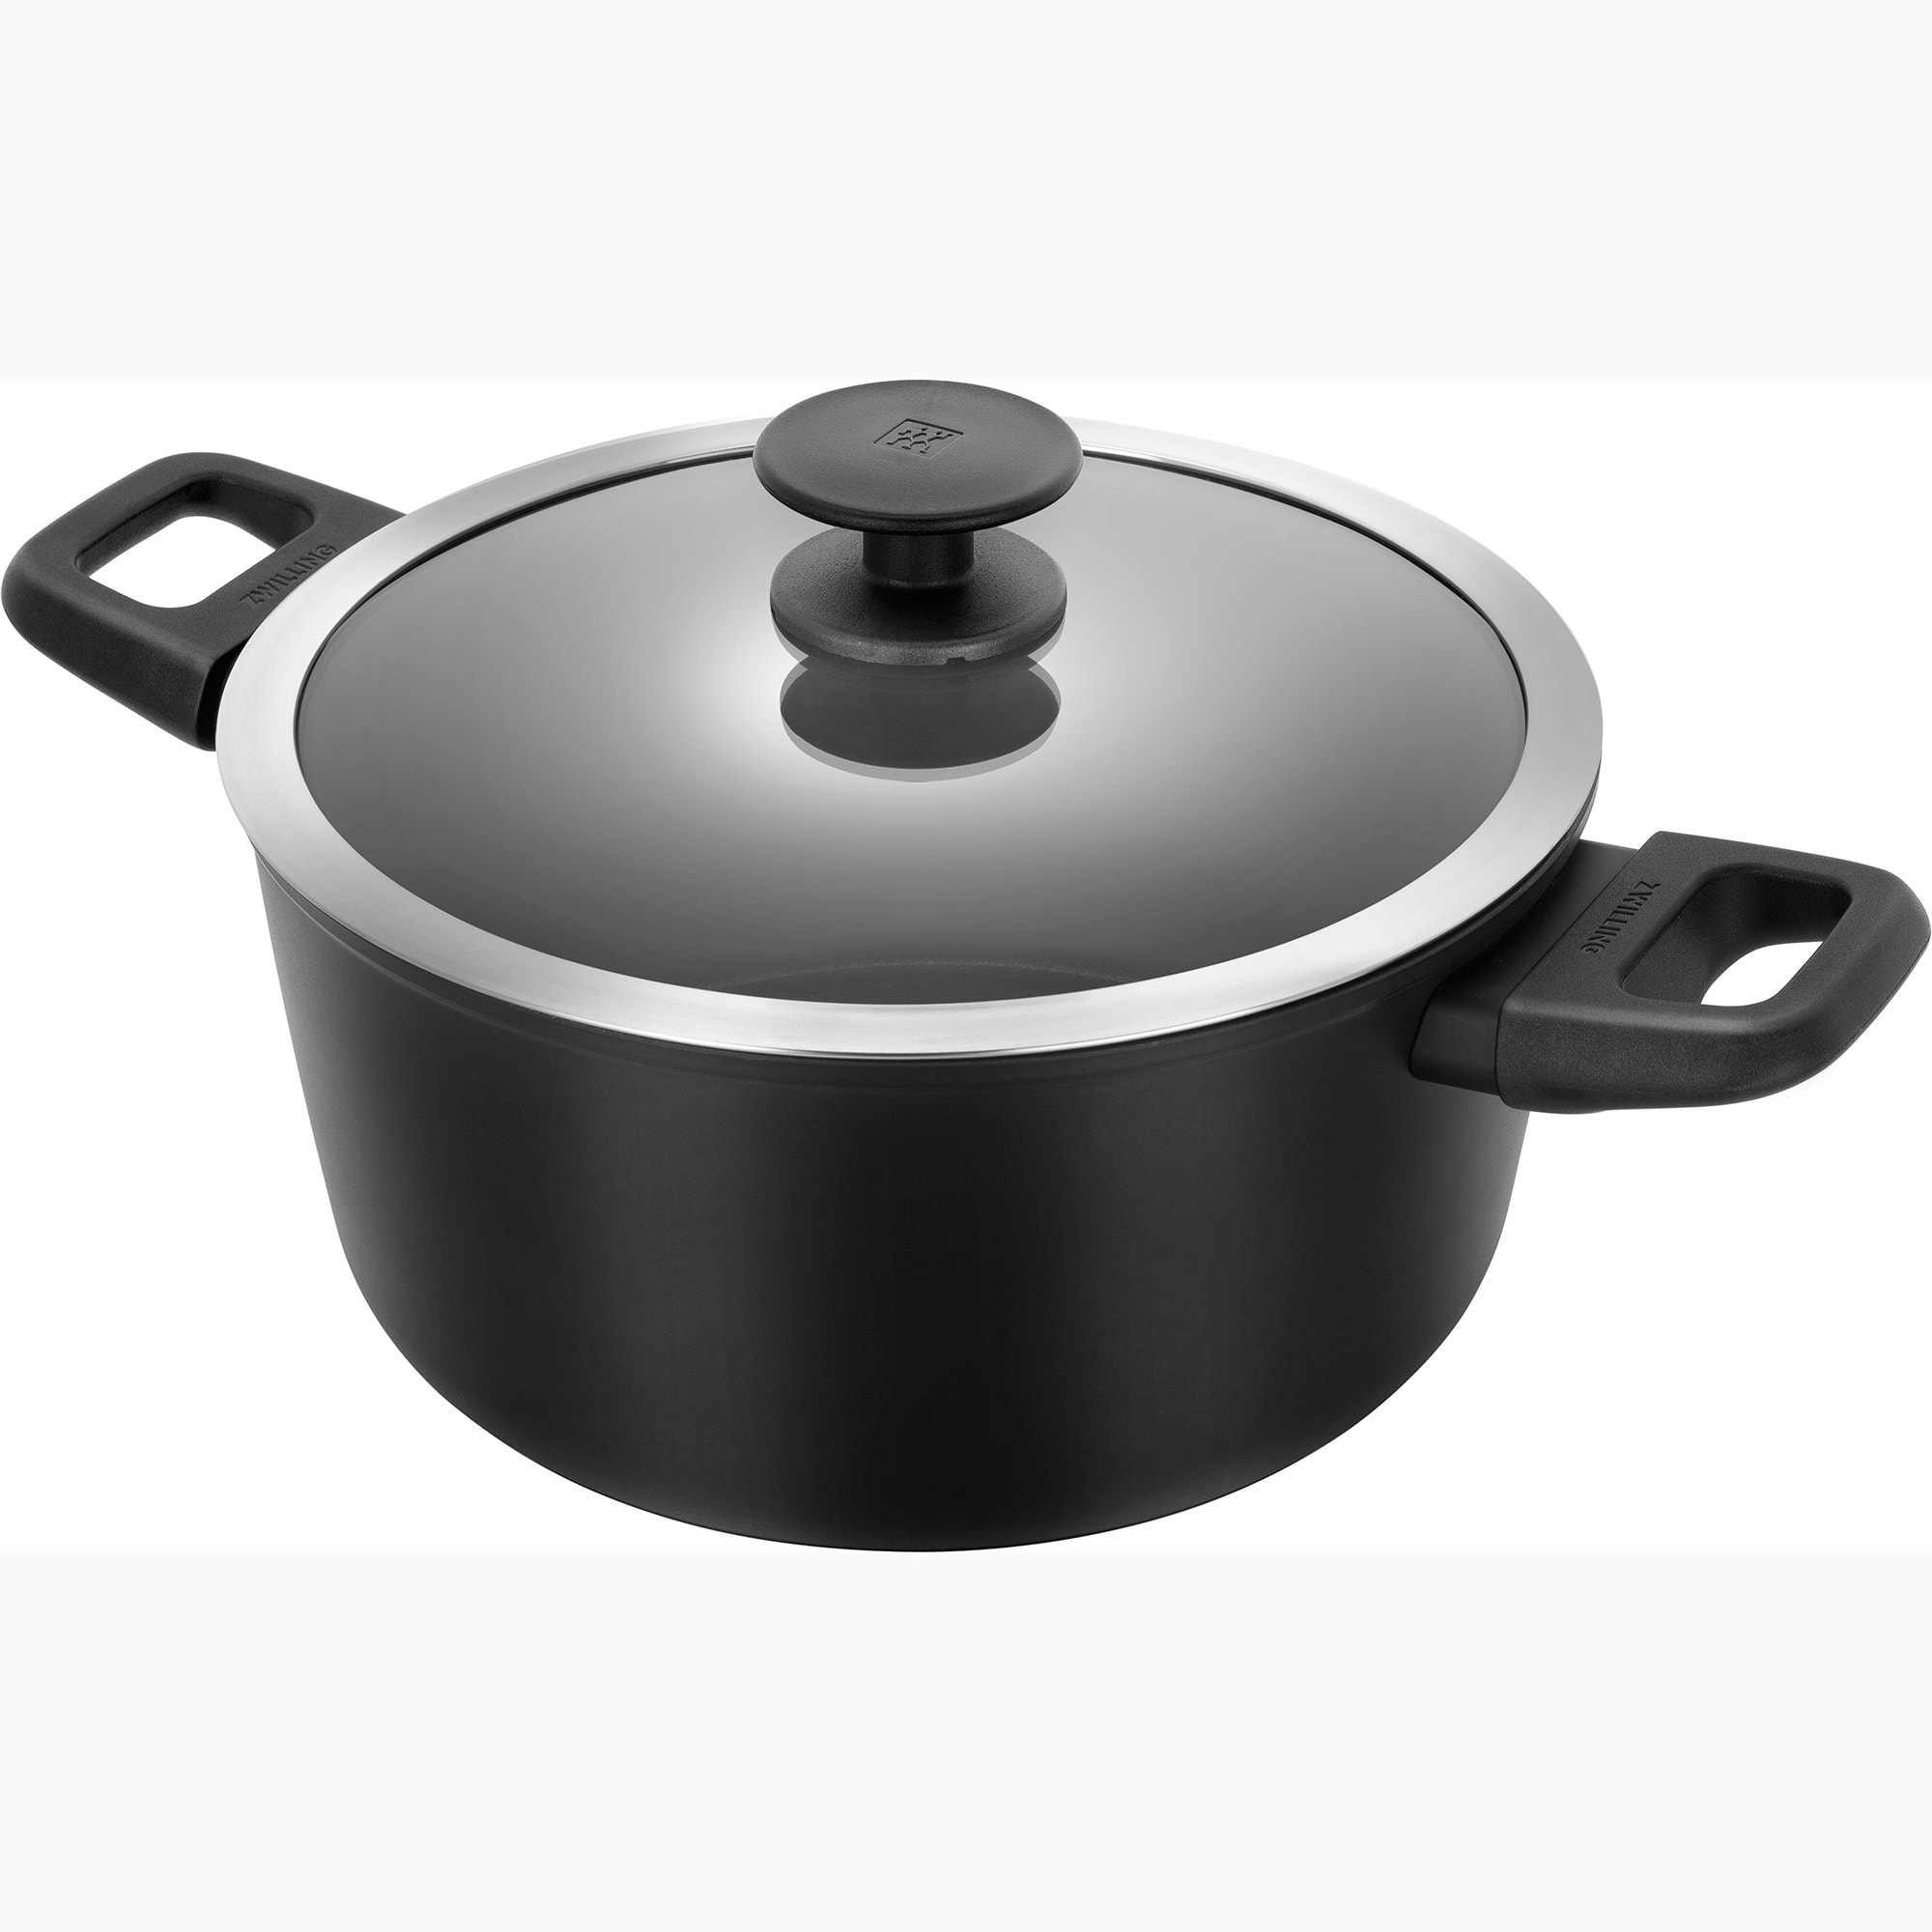 https://ak1.ostkcdn.com/images/products/is/images/direct/fd8a1db454ace17ca6923b80b7268fa2f700f207/ZWILLING-Madura-Plus-Forged-5-qt-Aluminum-Nonstick-Dutch-Oven-with-Lid.jpg